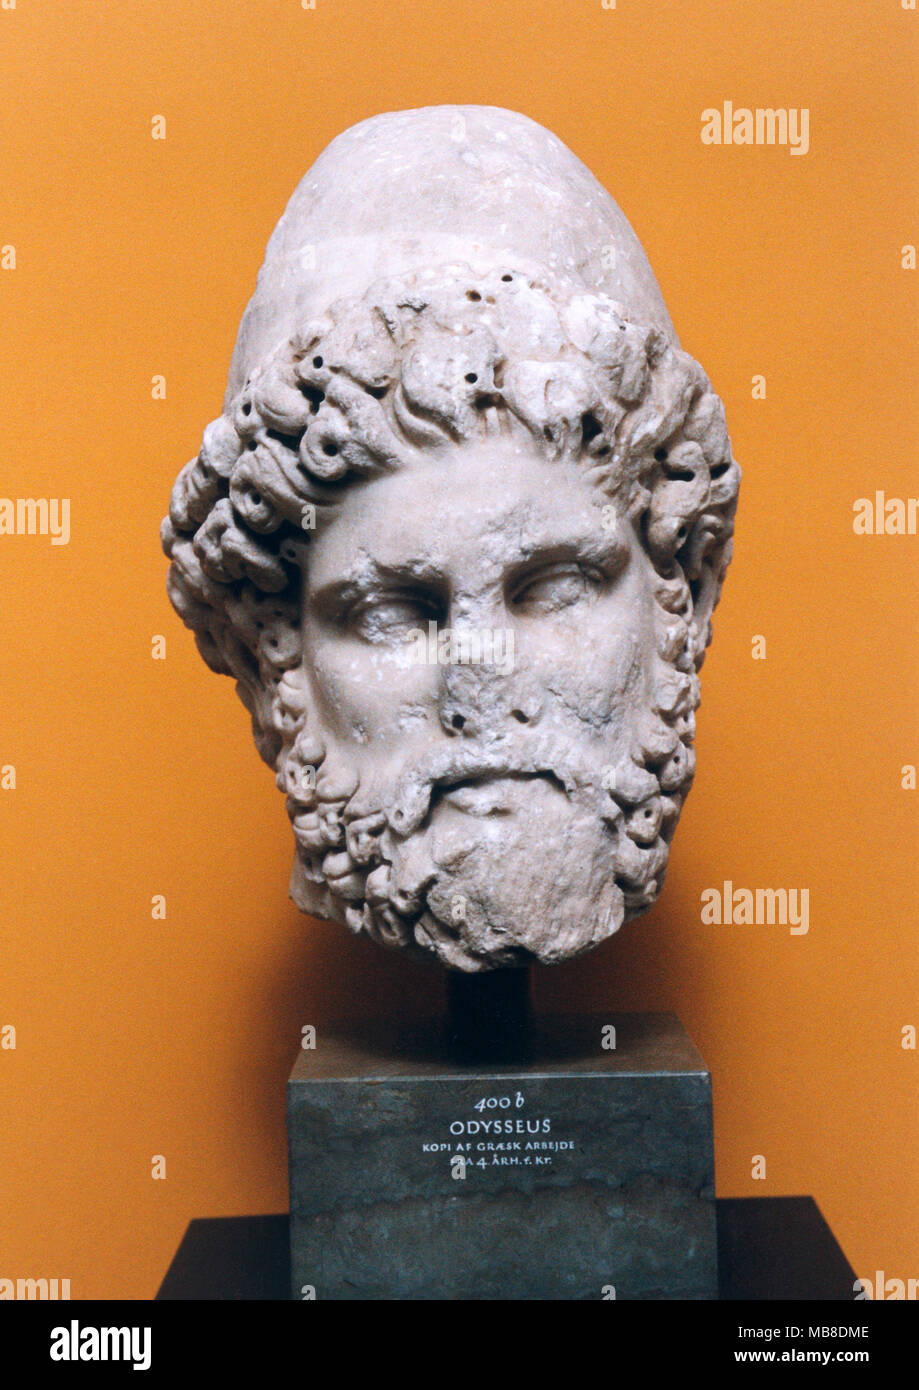 ODYSSEUS Sculpture is included in the Danish Glyptotekets collection 2005 Stock Photo